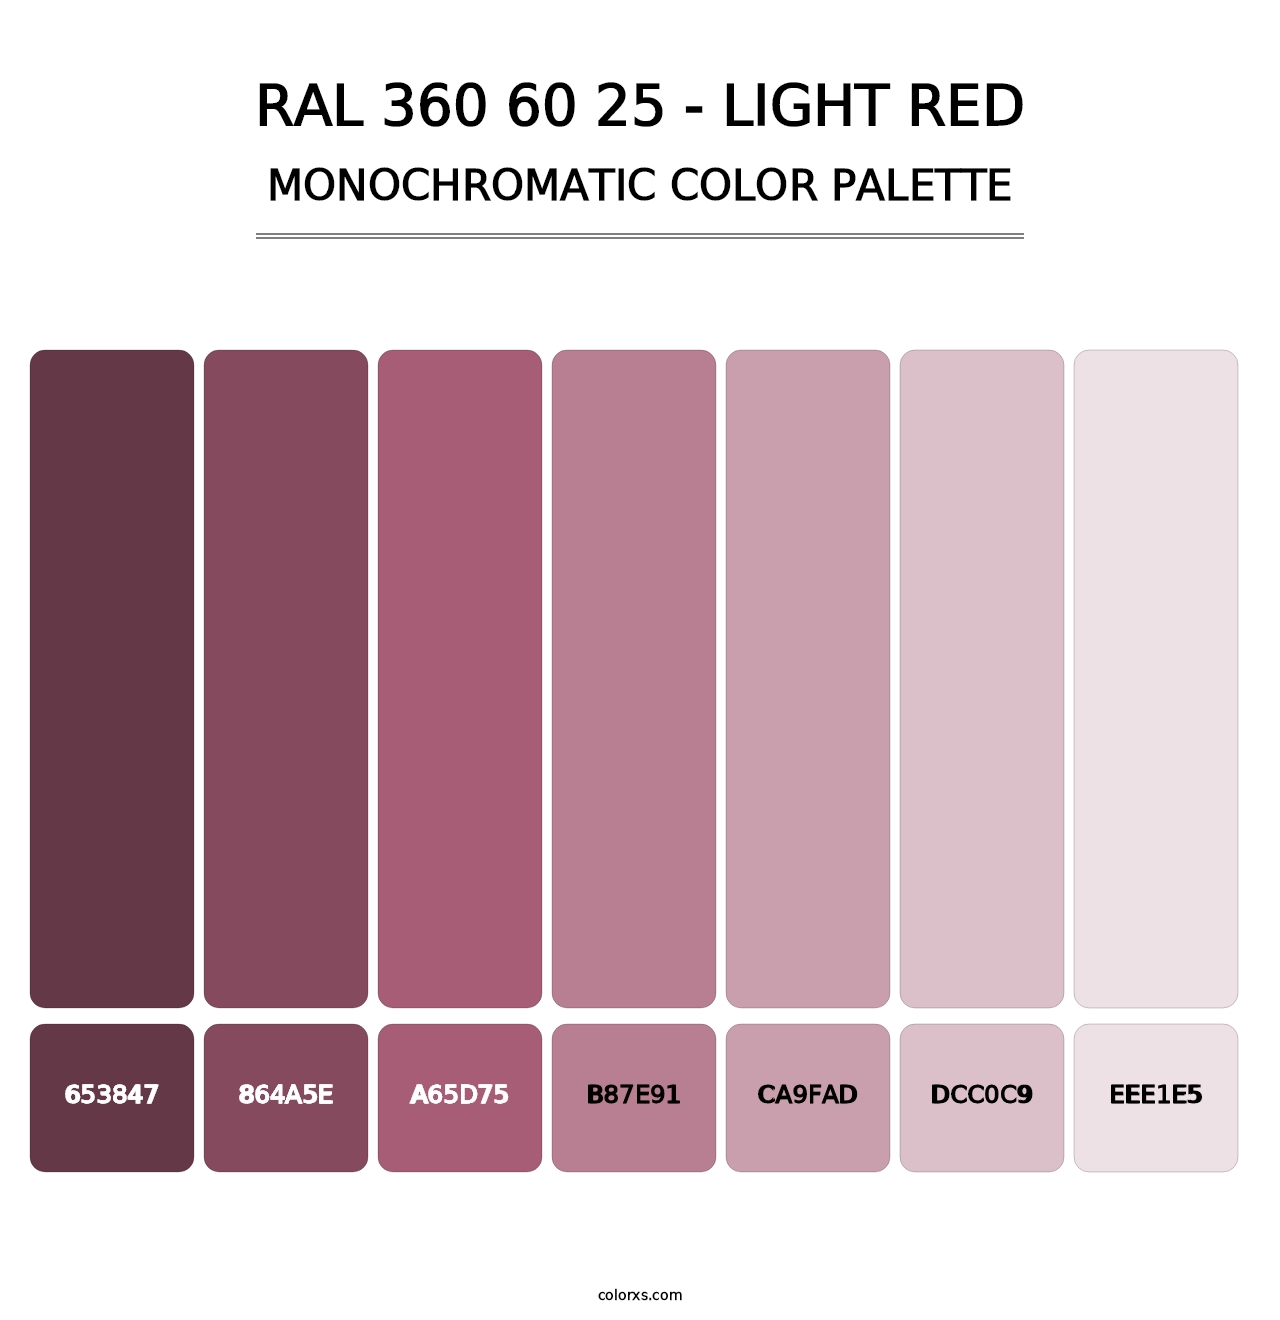 RAL 360 60 25 - Light Red - Monochromatic Color Palette